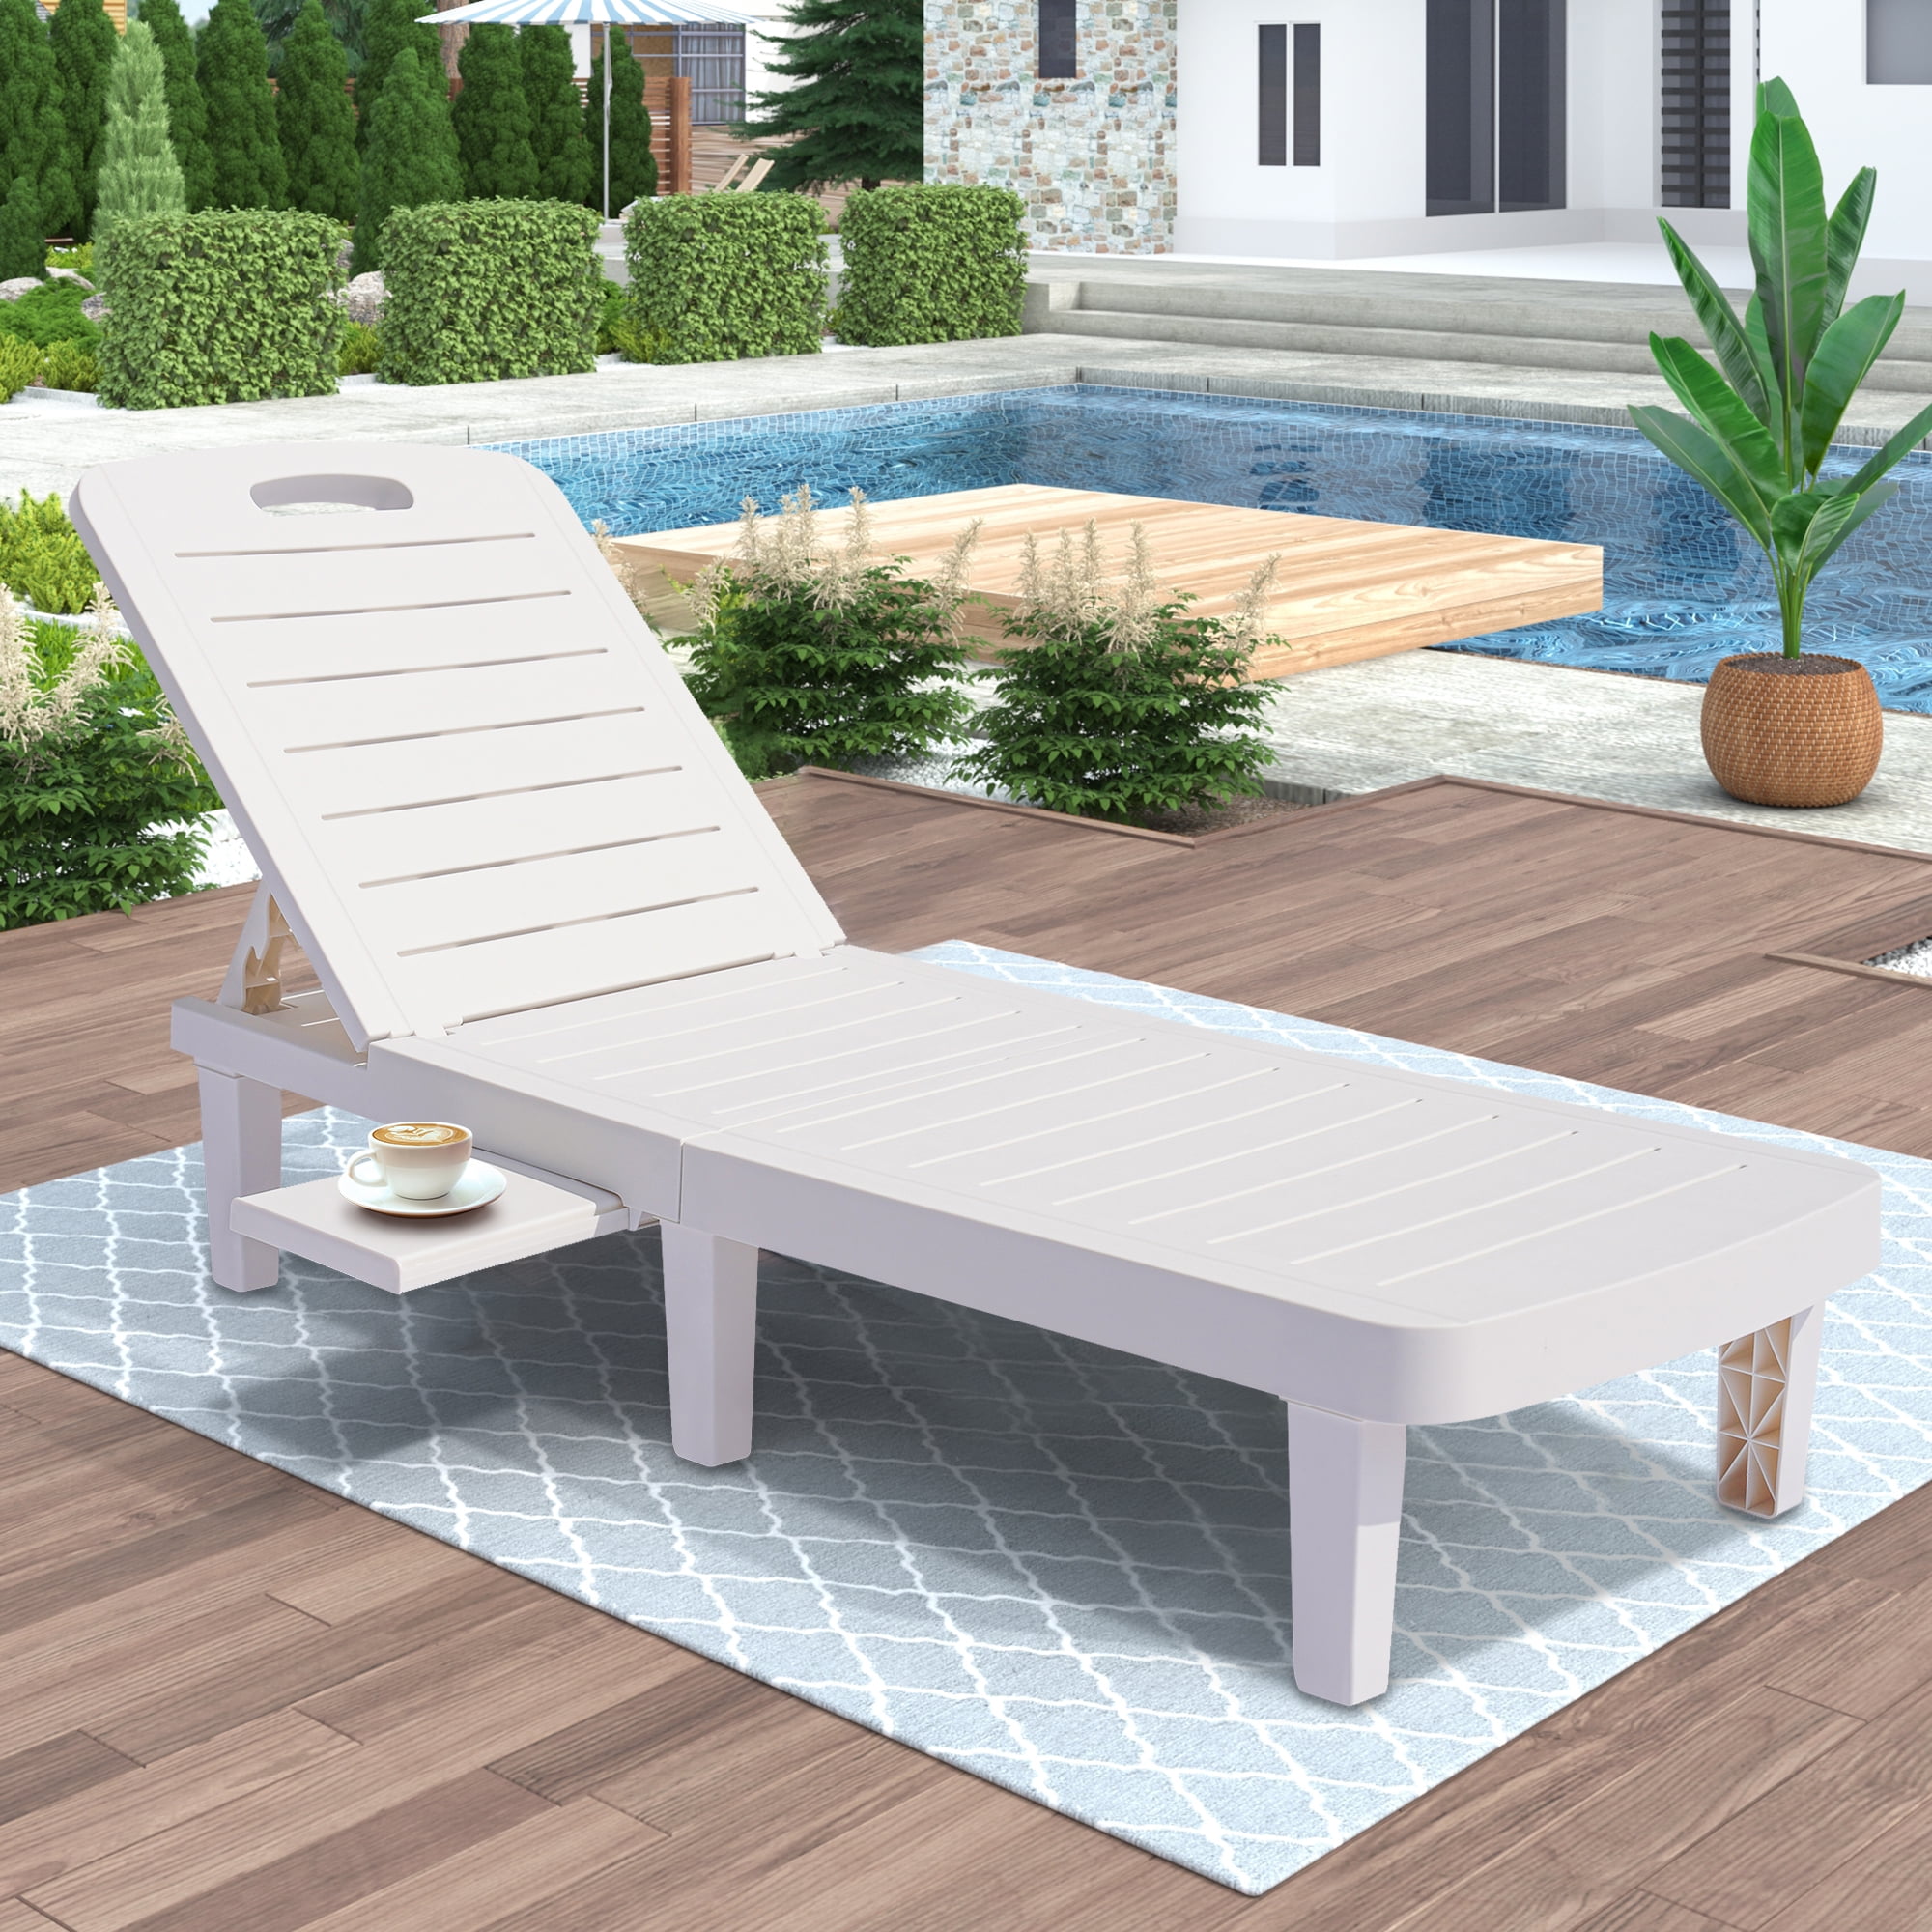 Patio Lounge Chair, Adjustable Chaise Lounge with Side Table, Outdoor  Lounger Recliner for Poolside, Patio, Backyard, Wood Texture Design, Waterproof, Easy to Assemble